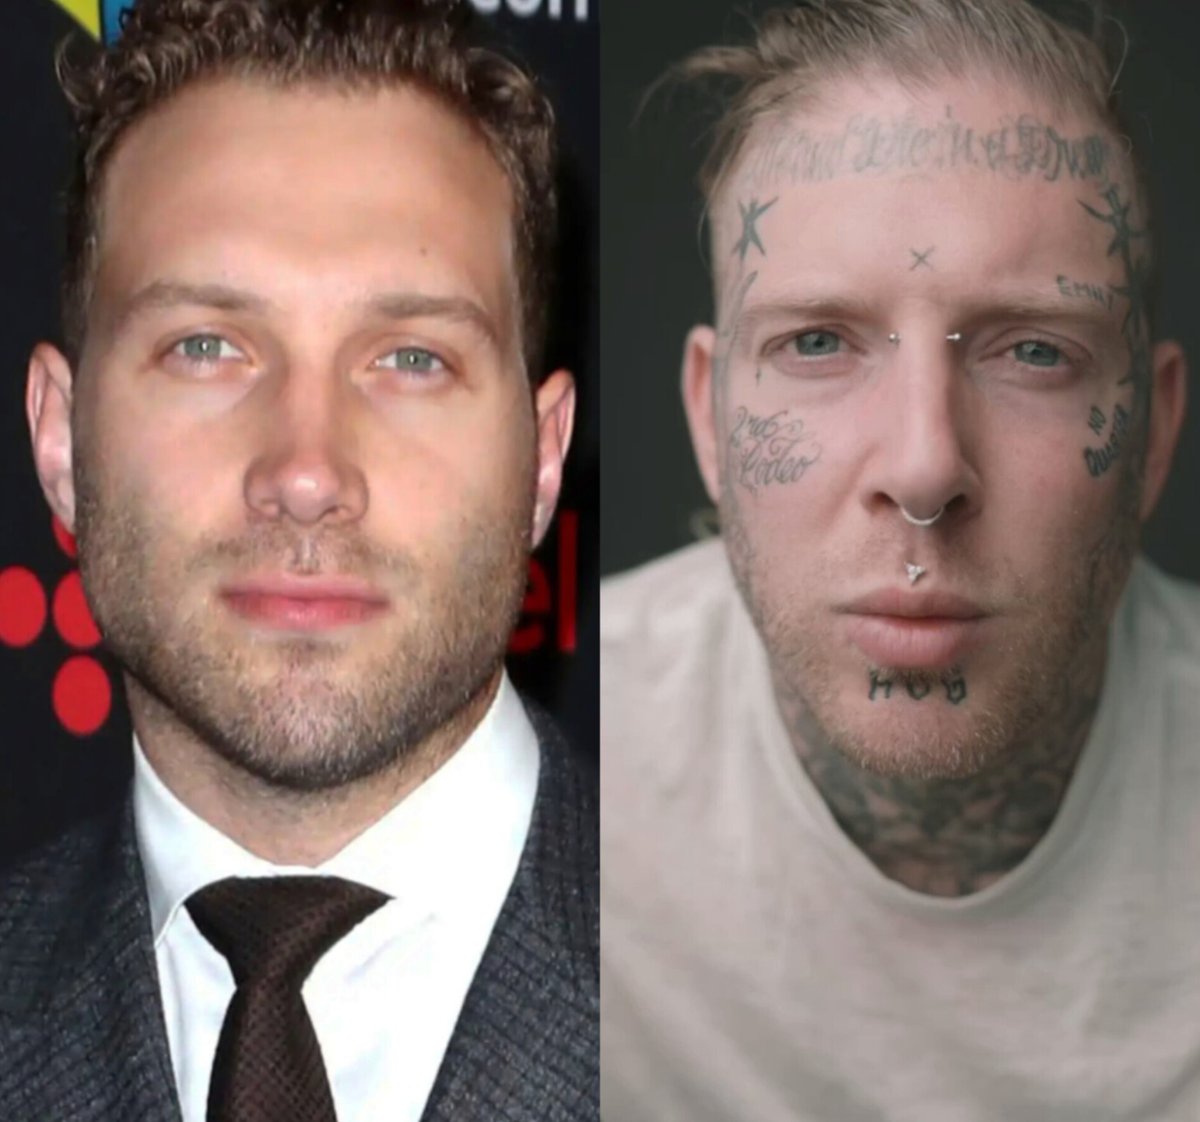 Some guy on YouTube thinks this is the same person. Yes they look alike but they aren't the same person. One is Actor Jai Courtney and the other is Musician Tom MacDonald #lookalike #jaicourtney #tommacdonald #lookalikes #Celebrity #celebritylookalikes